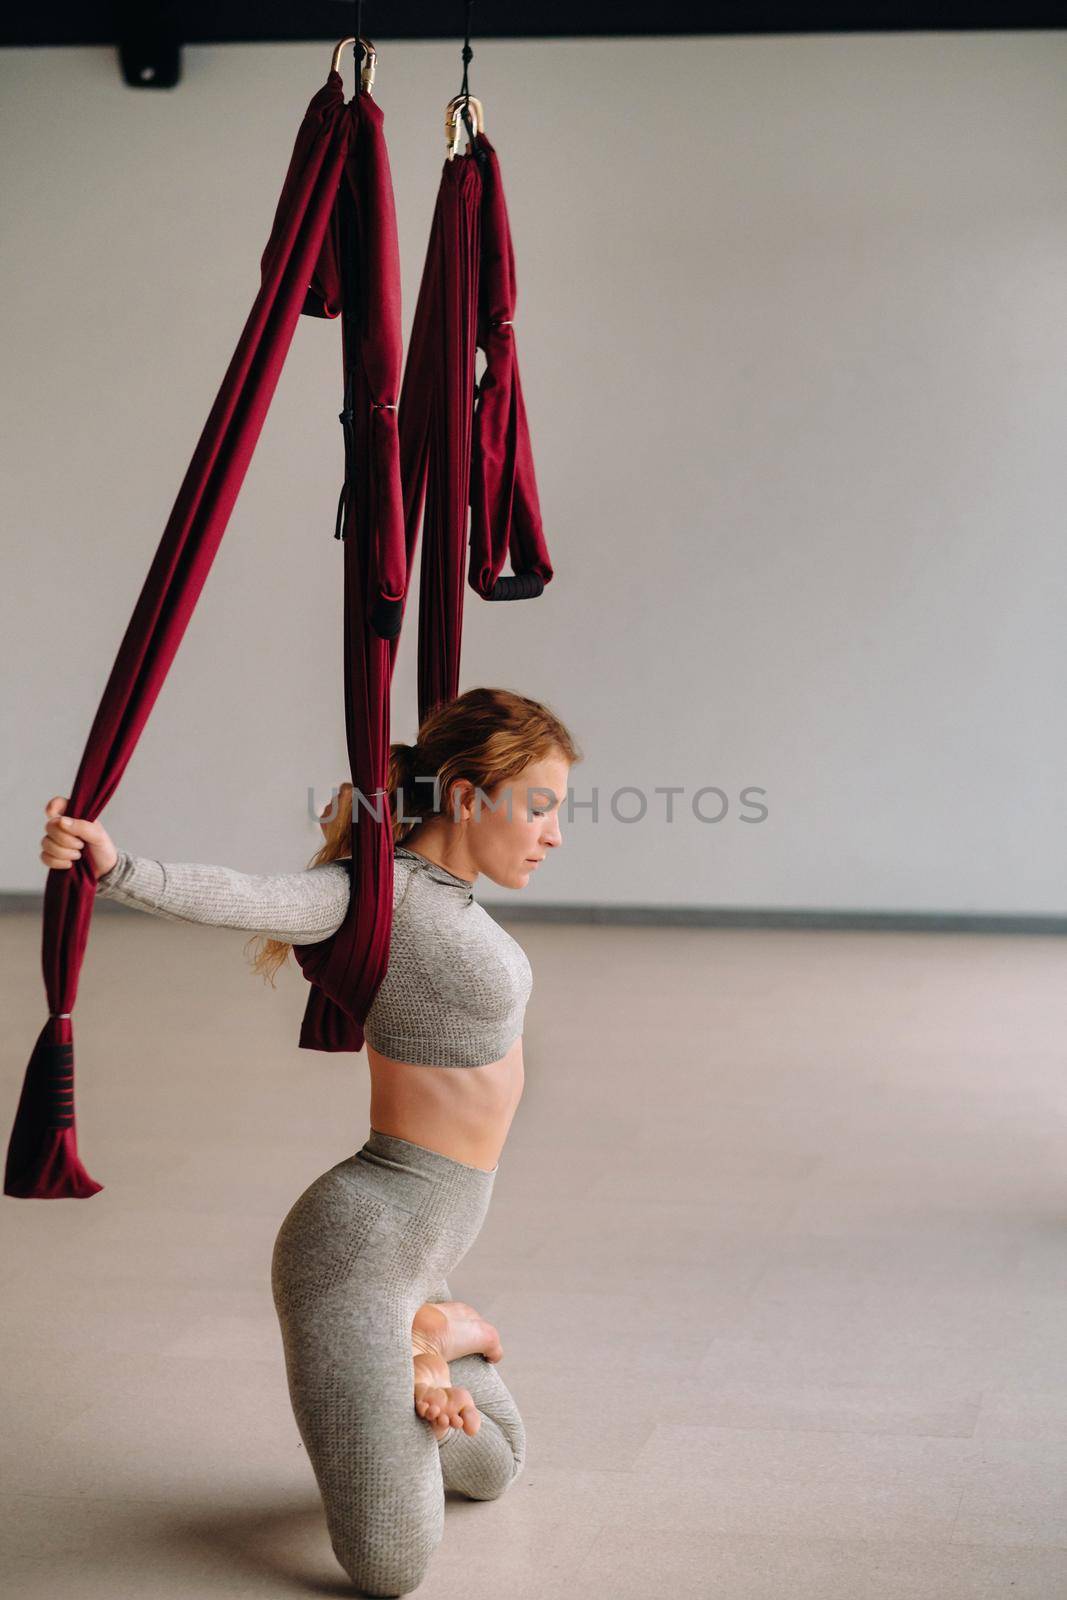 A woman does yoga on a suspended burgundy hammock in a bright gym by Lobachad